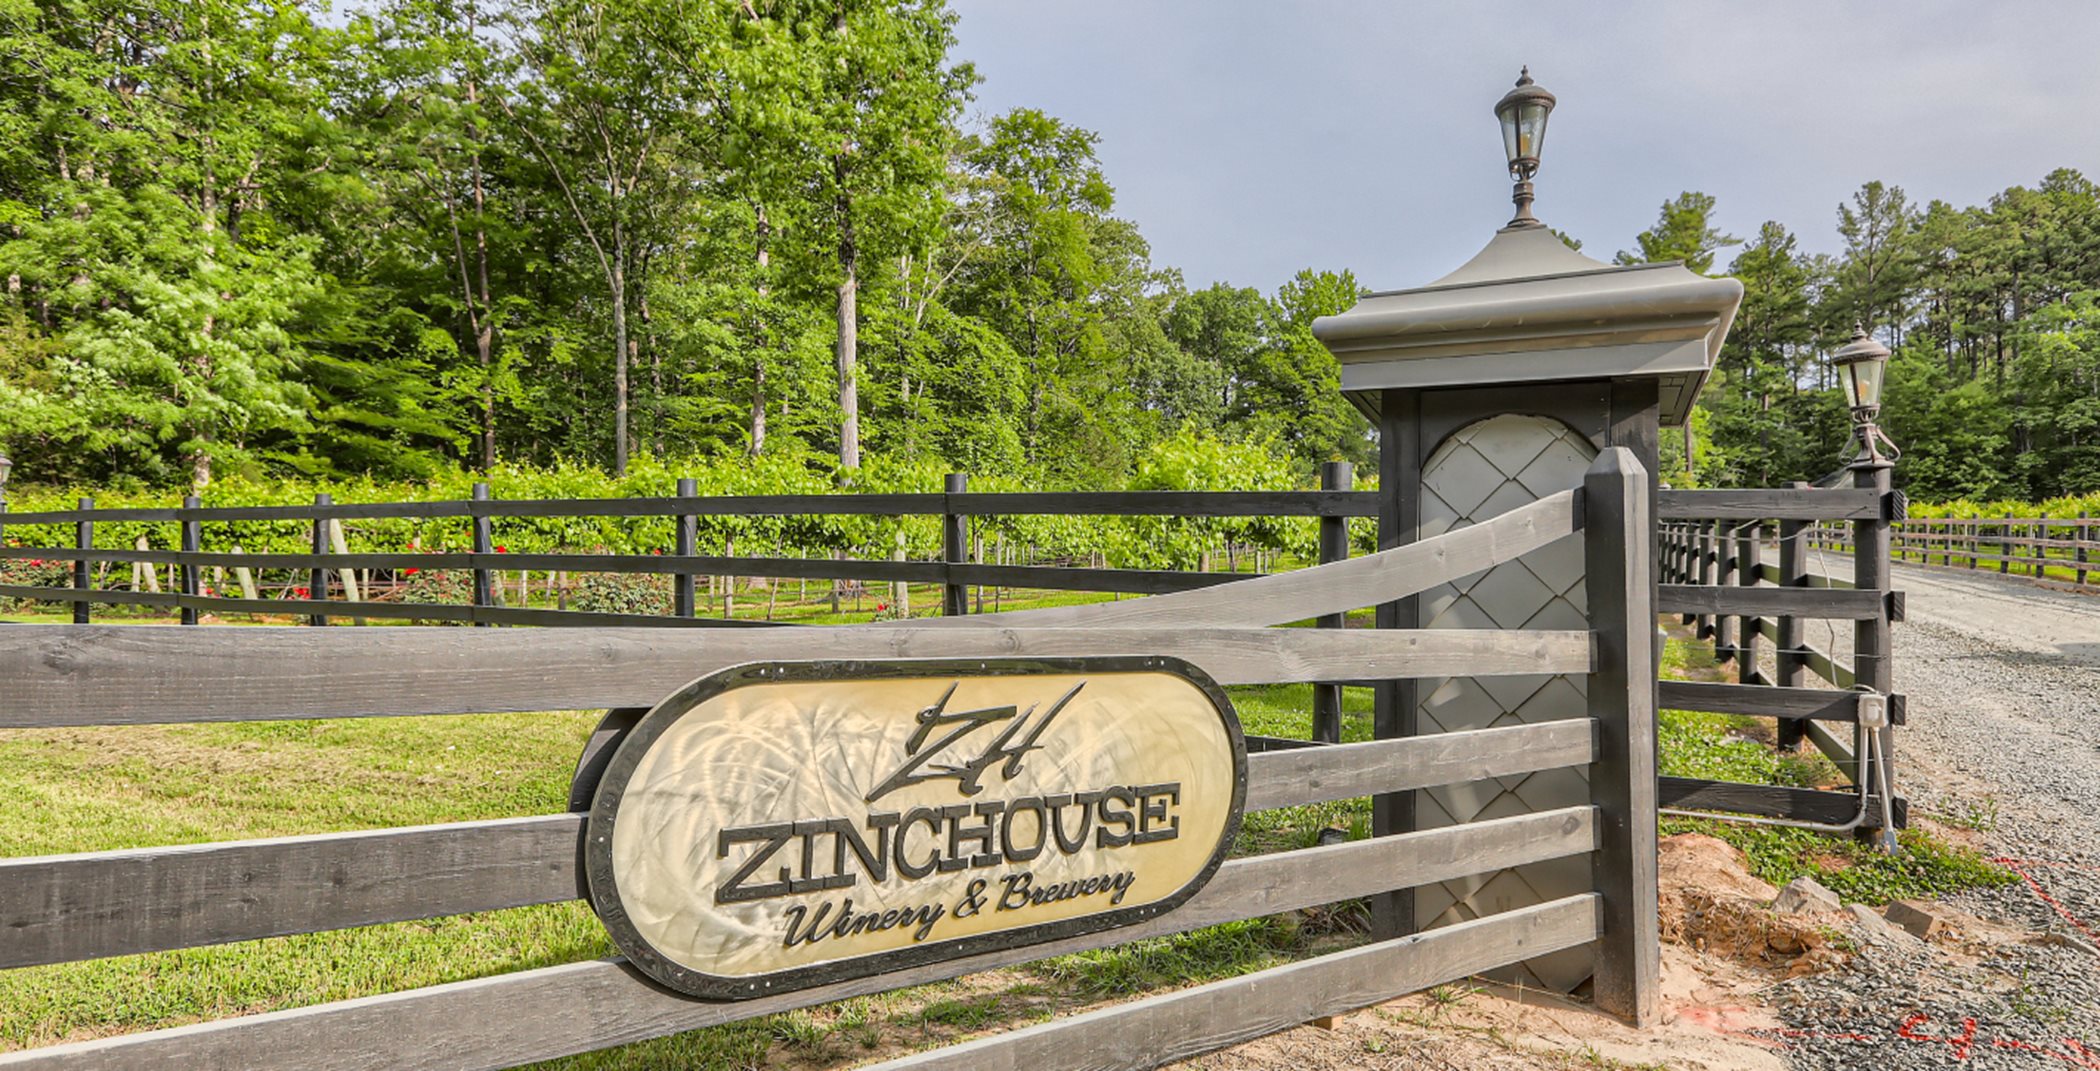 ZincHouse Winery and Brewery